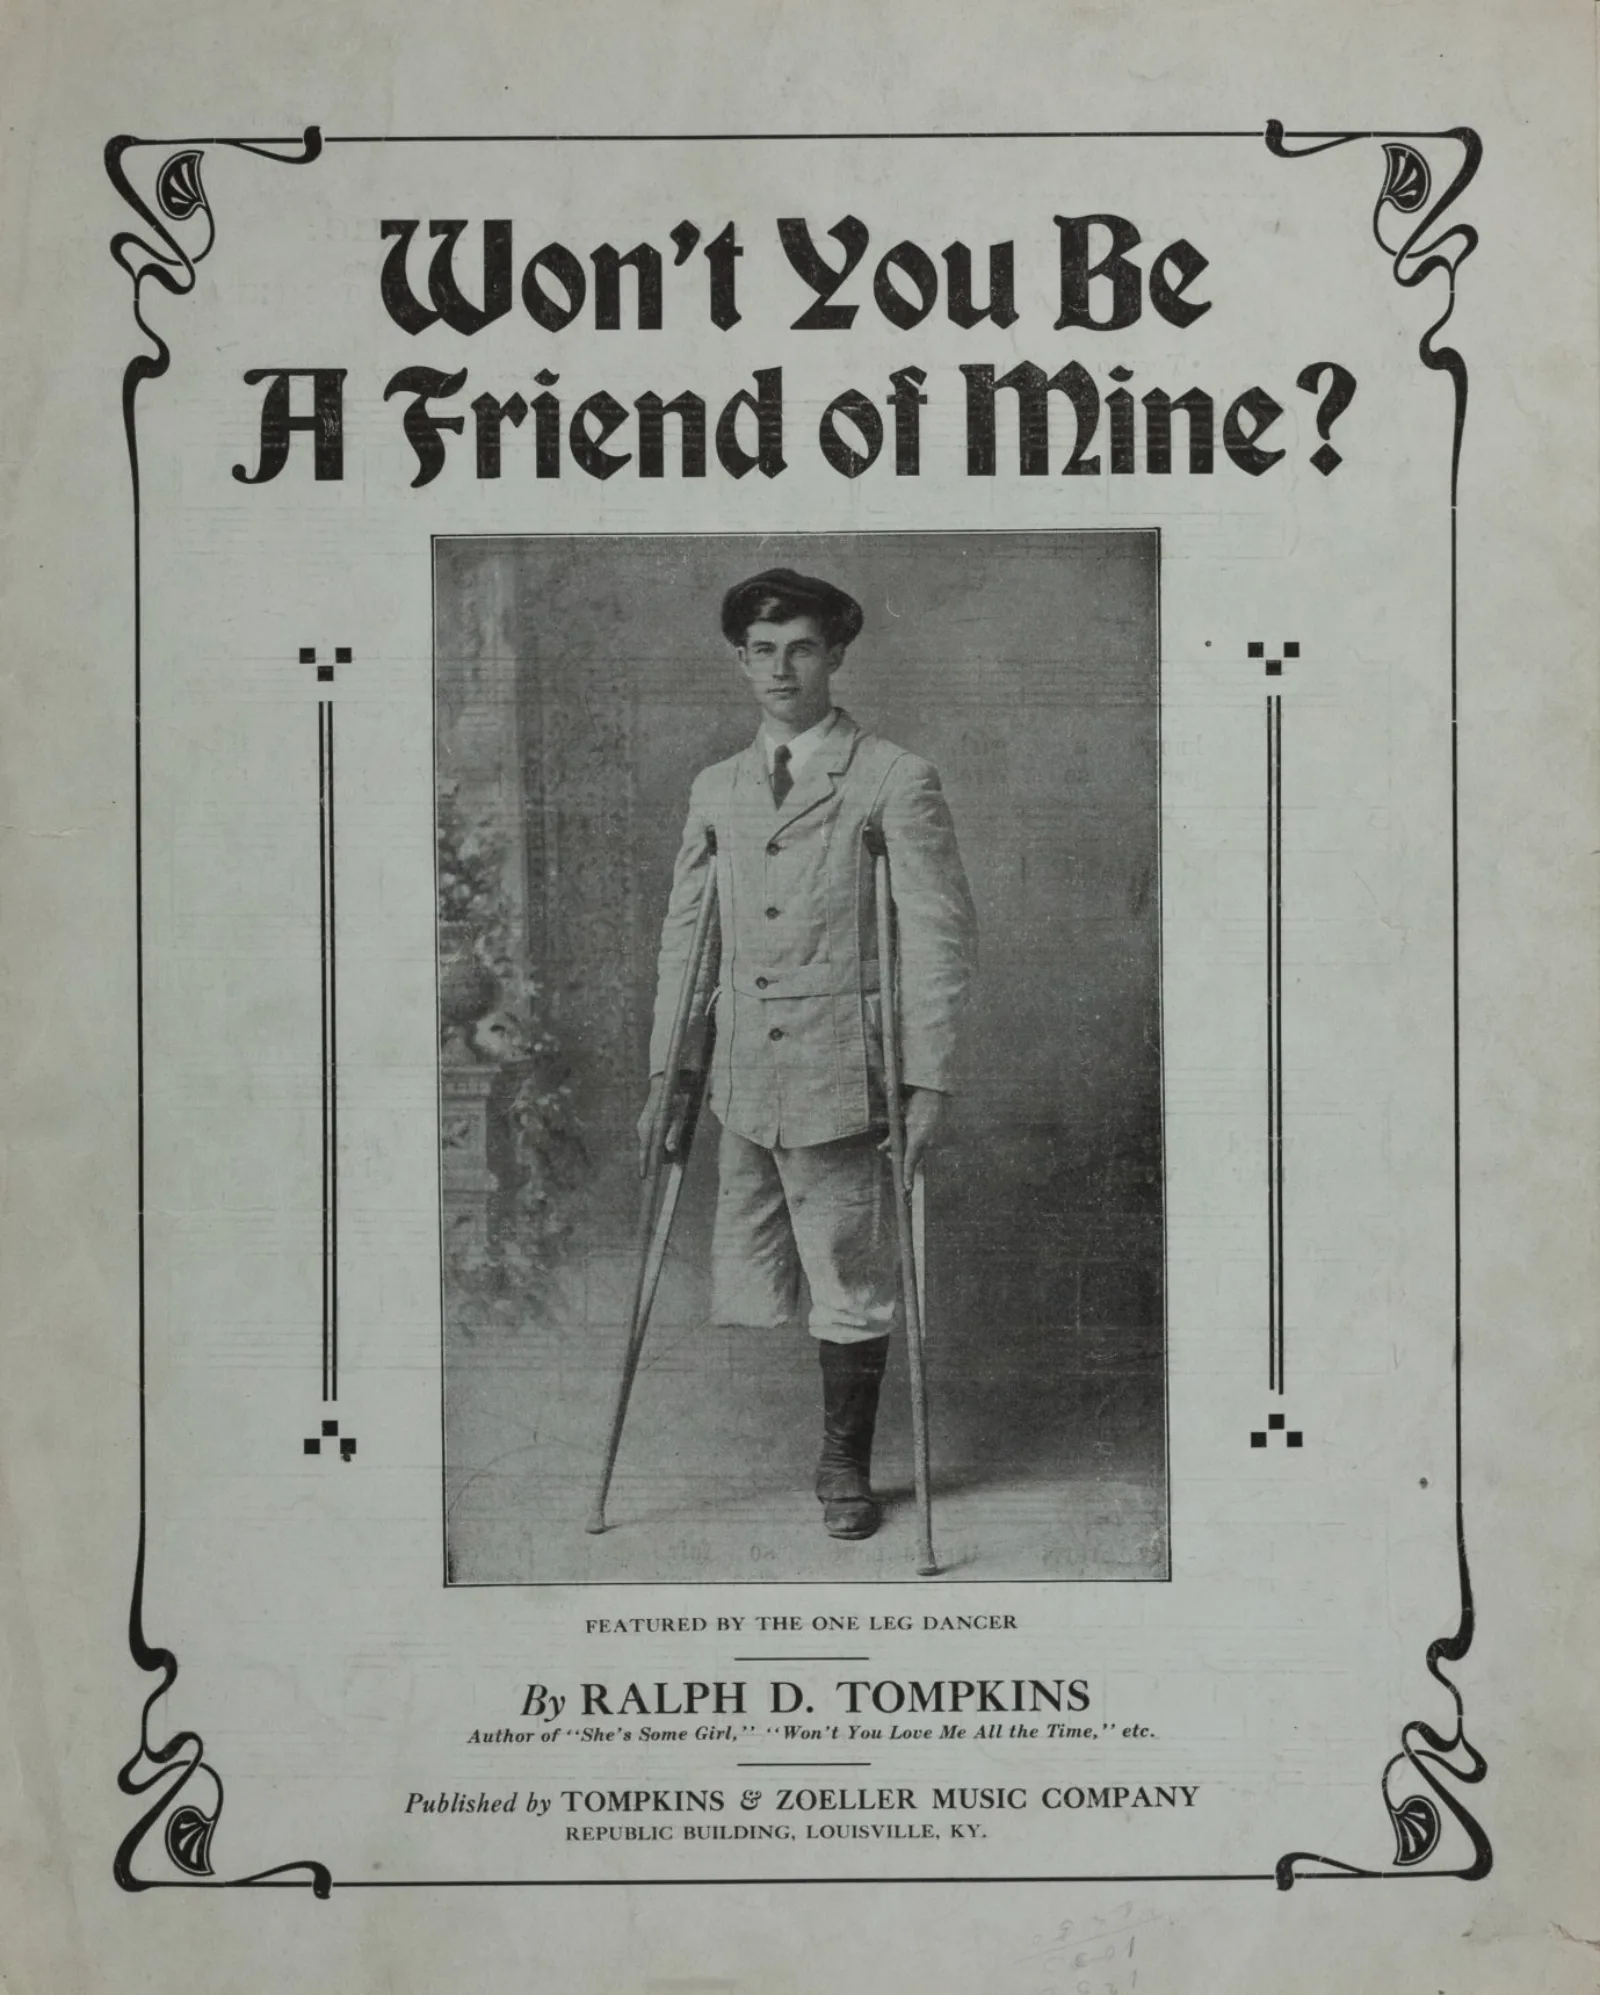 A photo of Tompkins in a suit, hat, and crutches is on the cover of his sheet music for "Won't You Be a Friend of Mine."